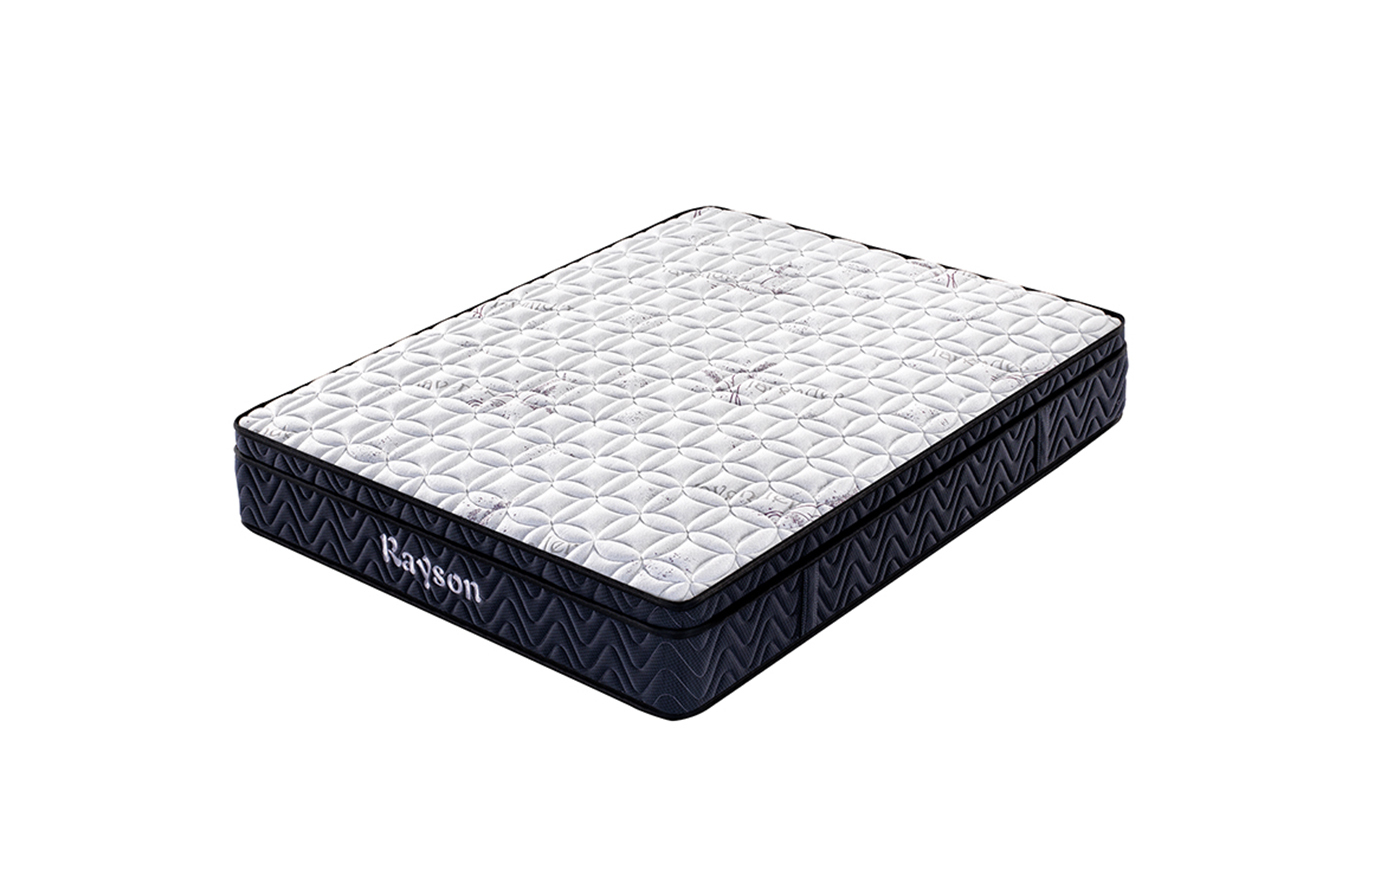 customized queen back top rated hotel mattresses Synwin manufacture